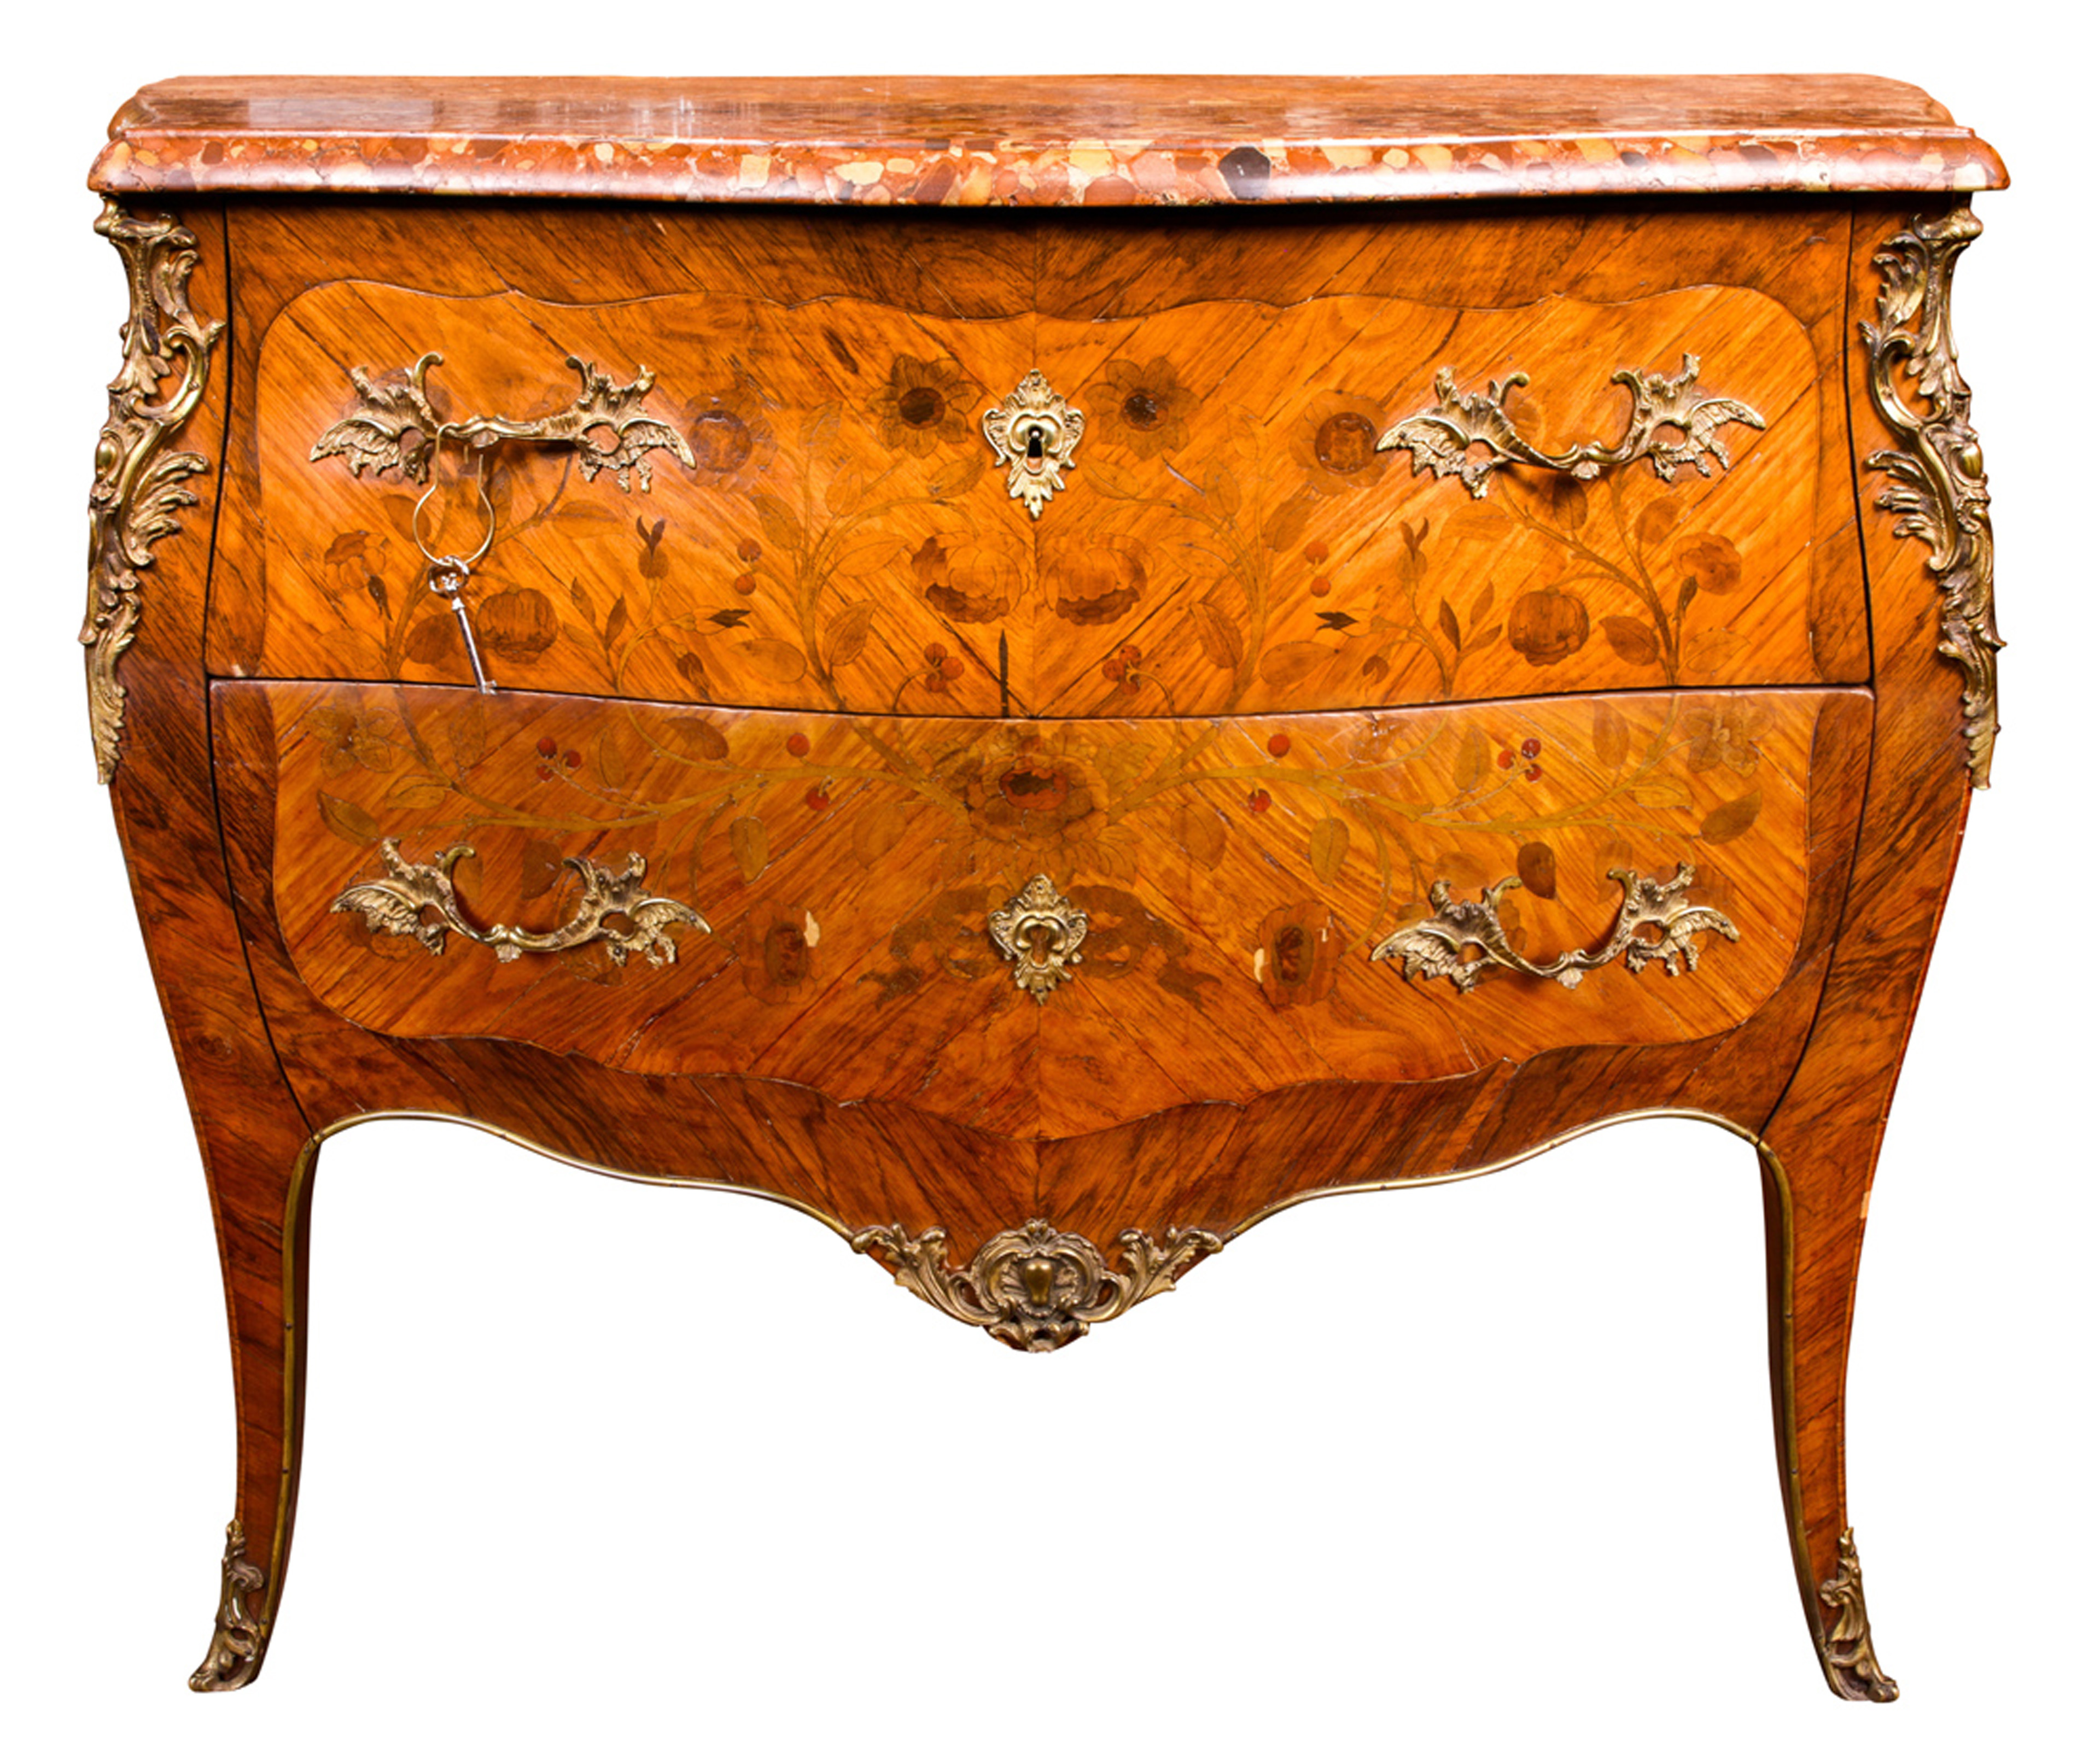 LOUIS XV STYLE MARBLE TOP COMMODE 3a5adf